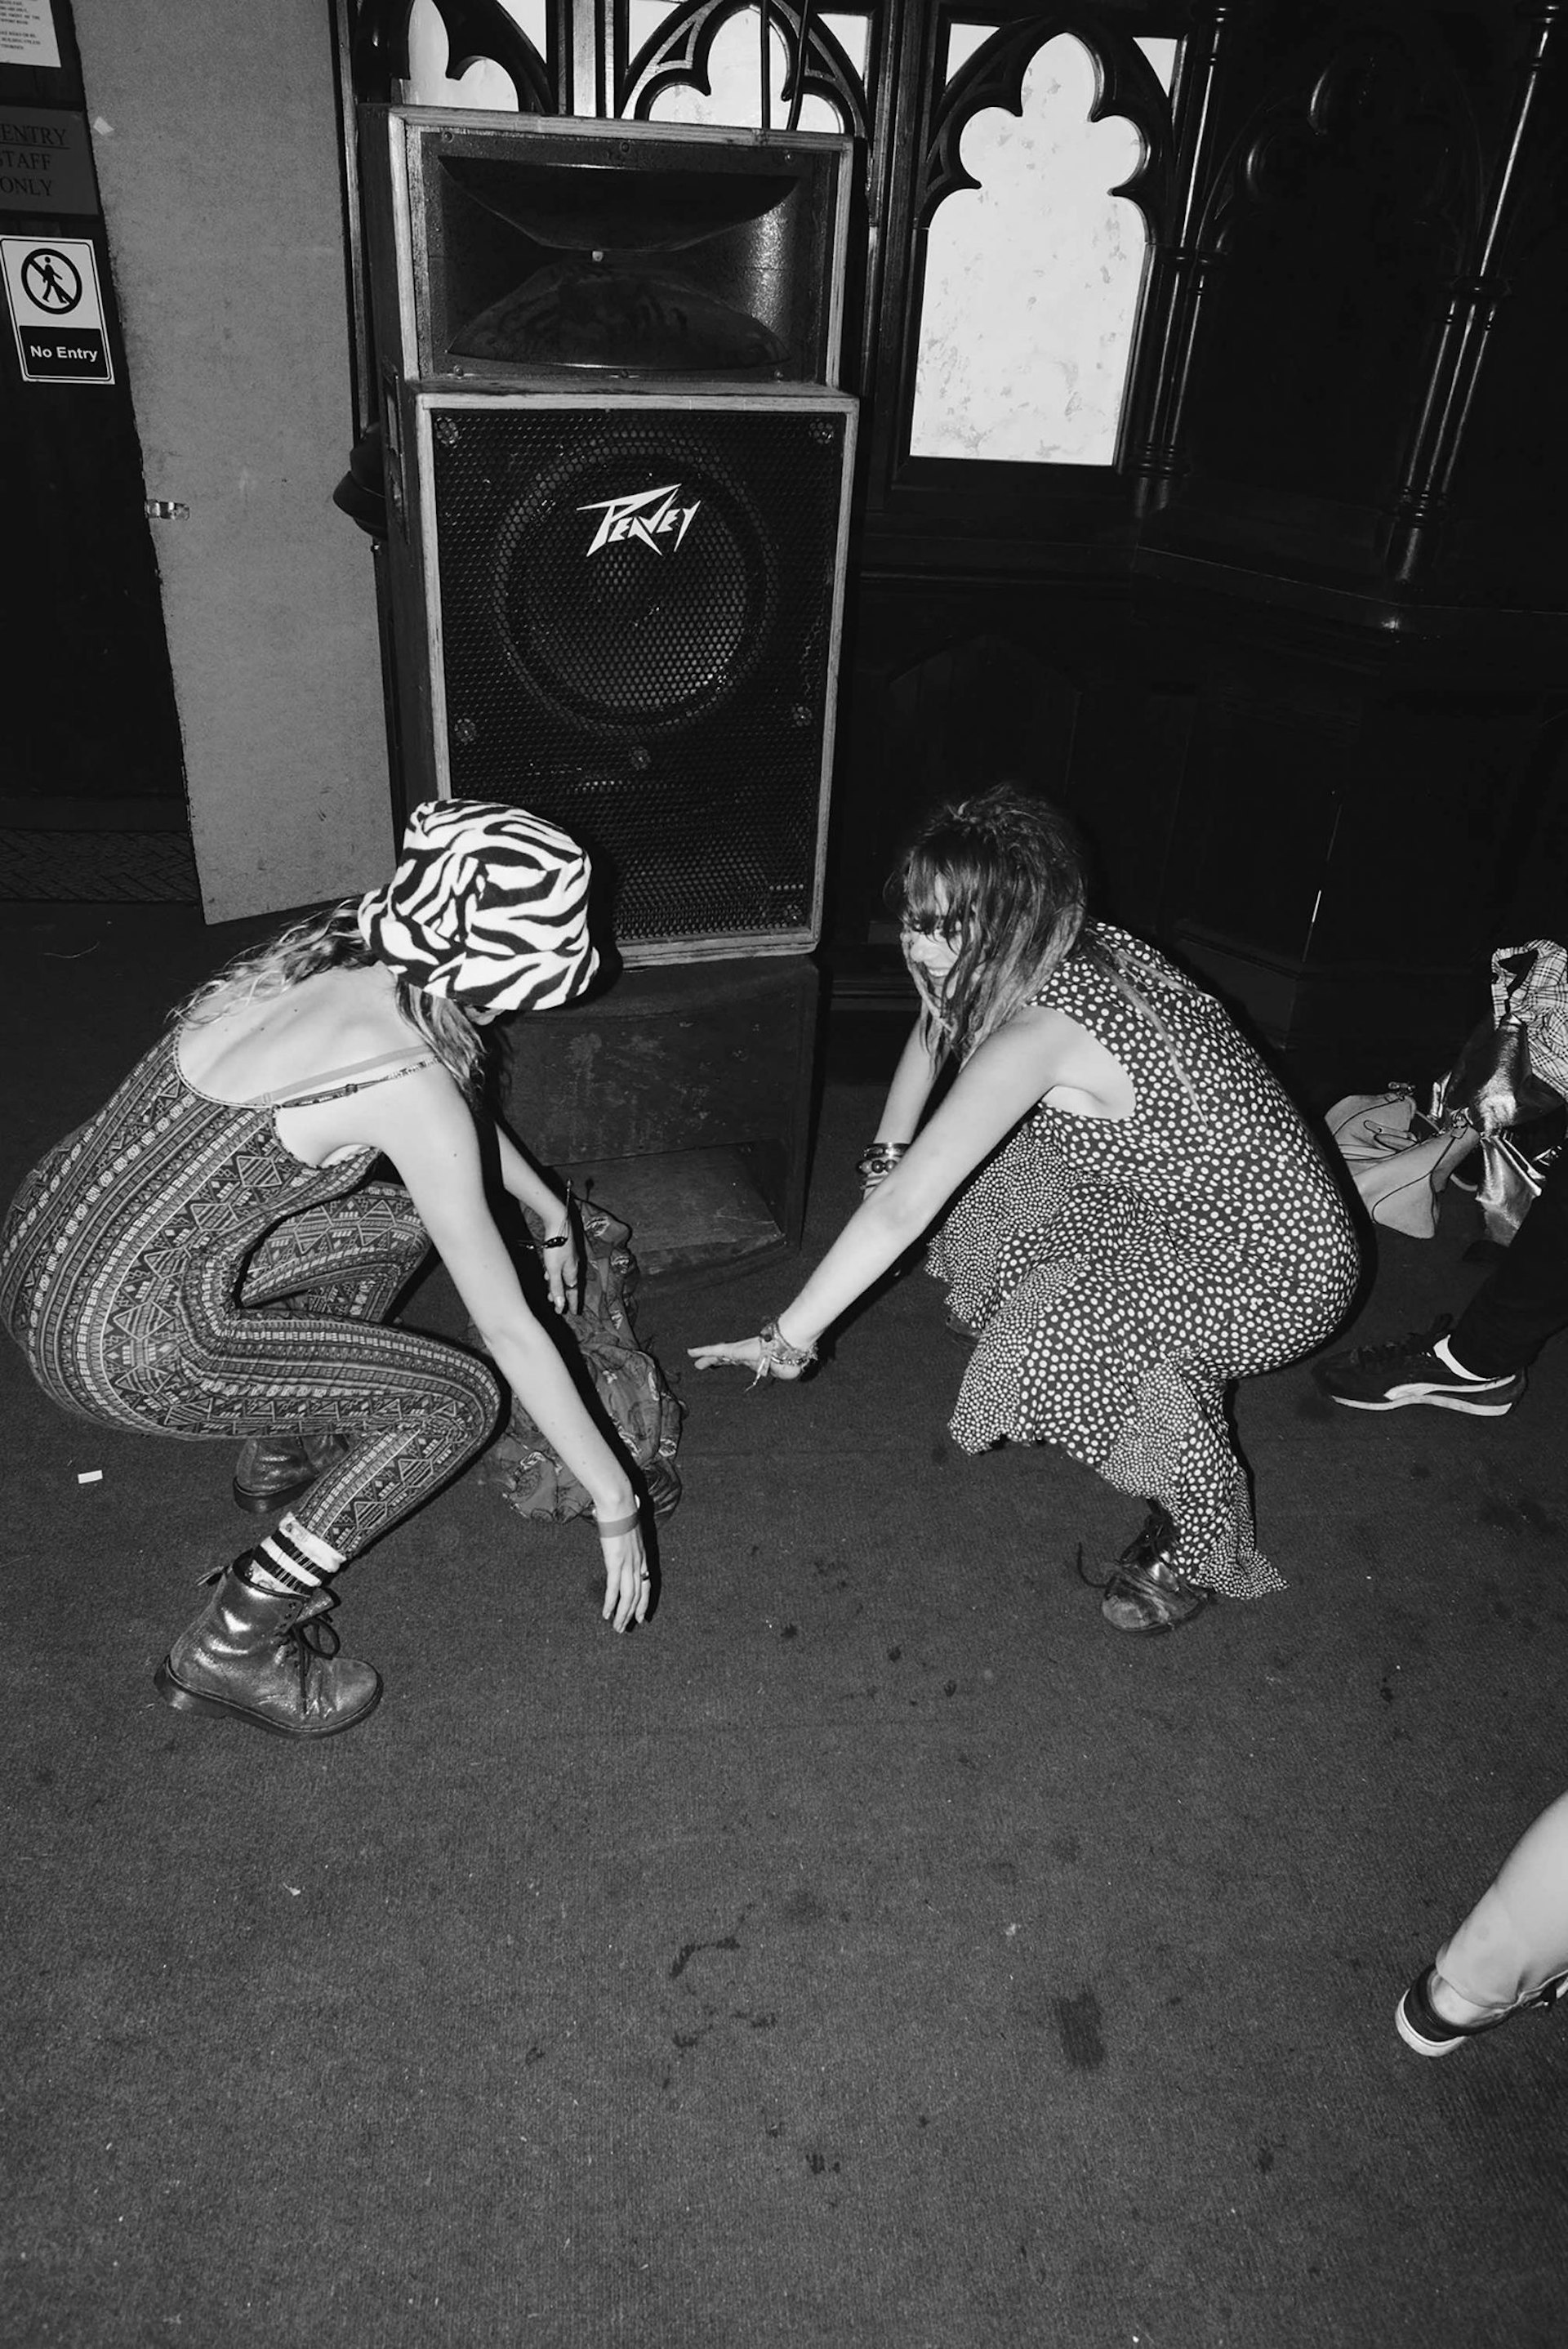 A photographer’s tribute to the Welsh drum and bass scene